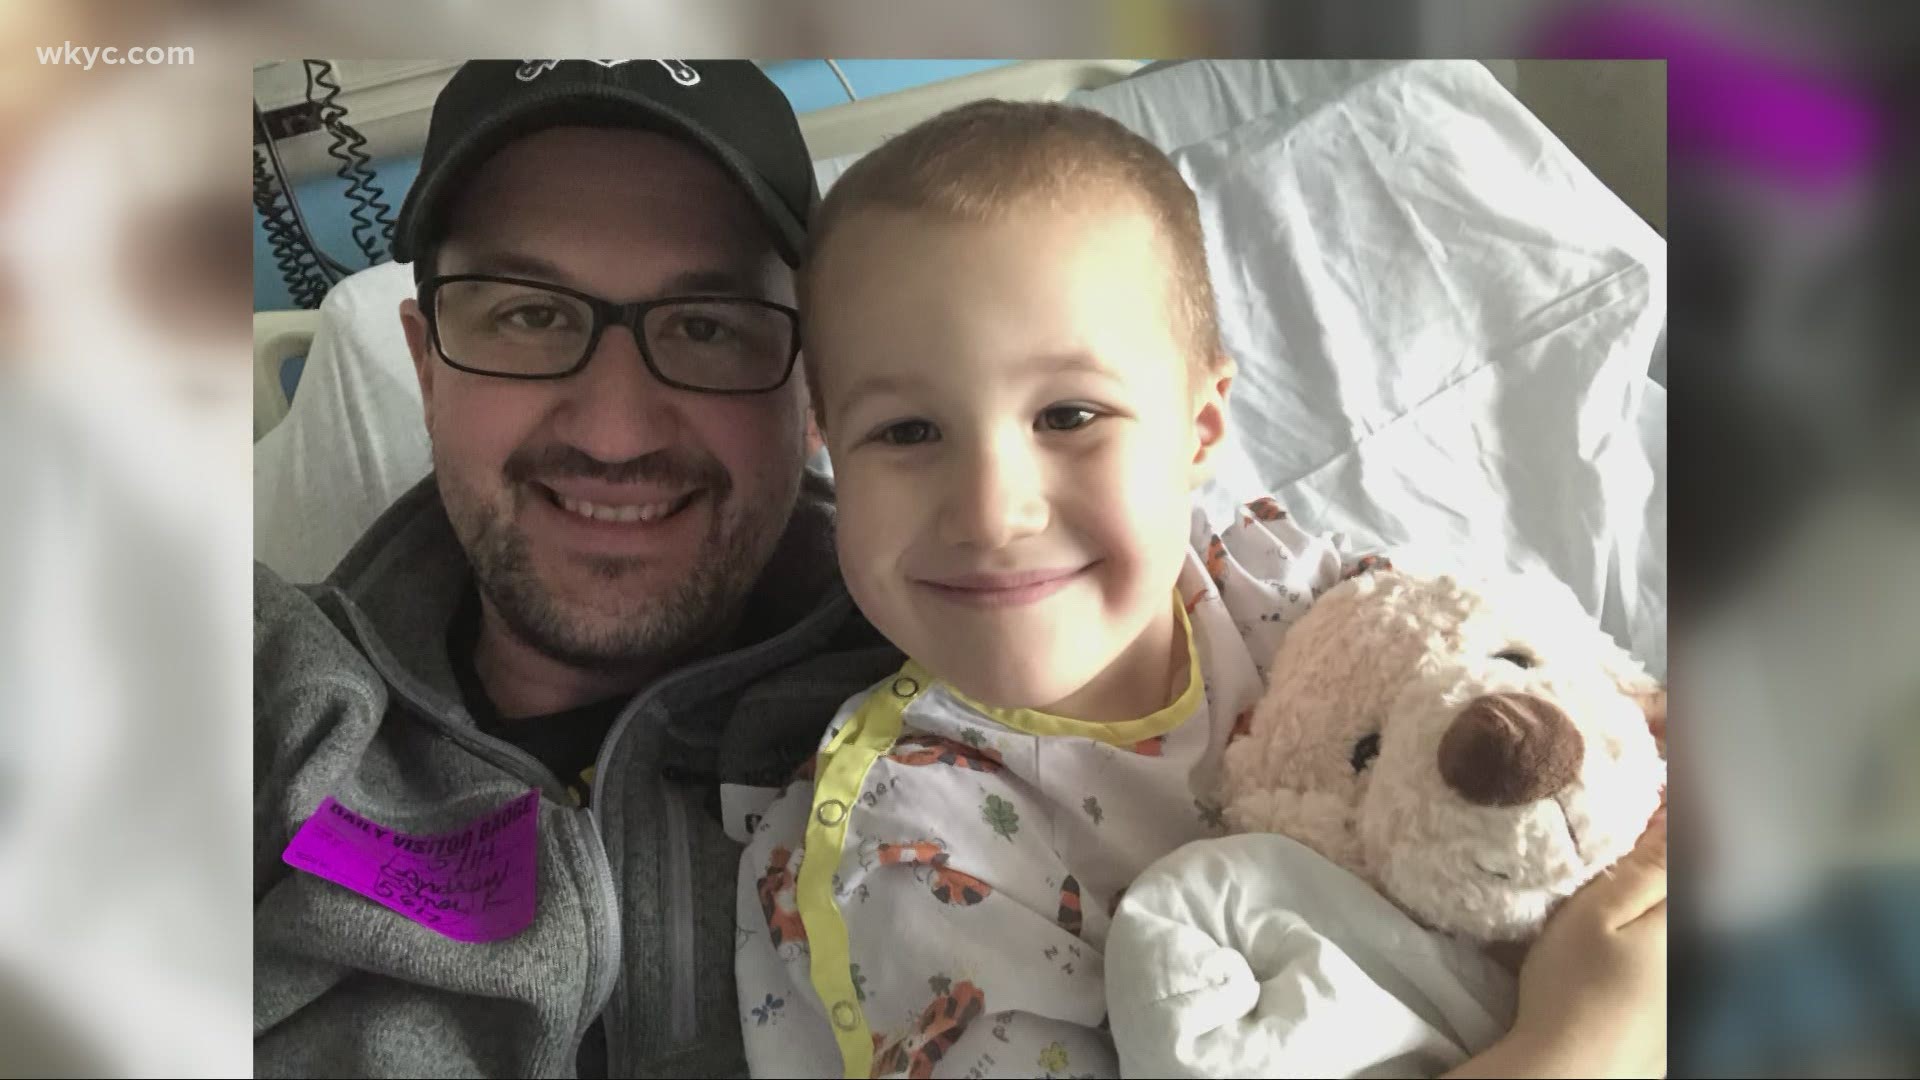 At just four years old, Kolt Codner's son, Andrew, was diagnosed with leukemia. Lindsay Buckingham shares this powerful story.